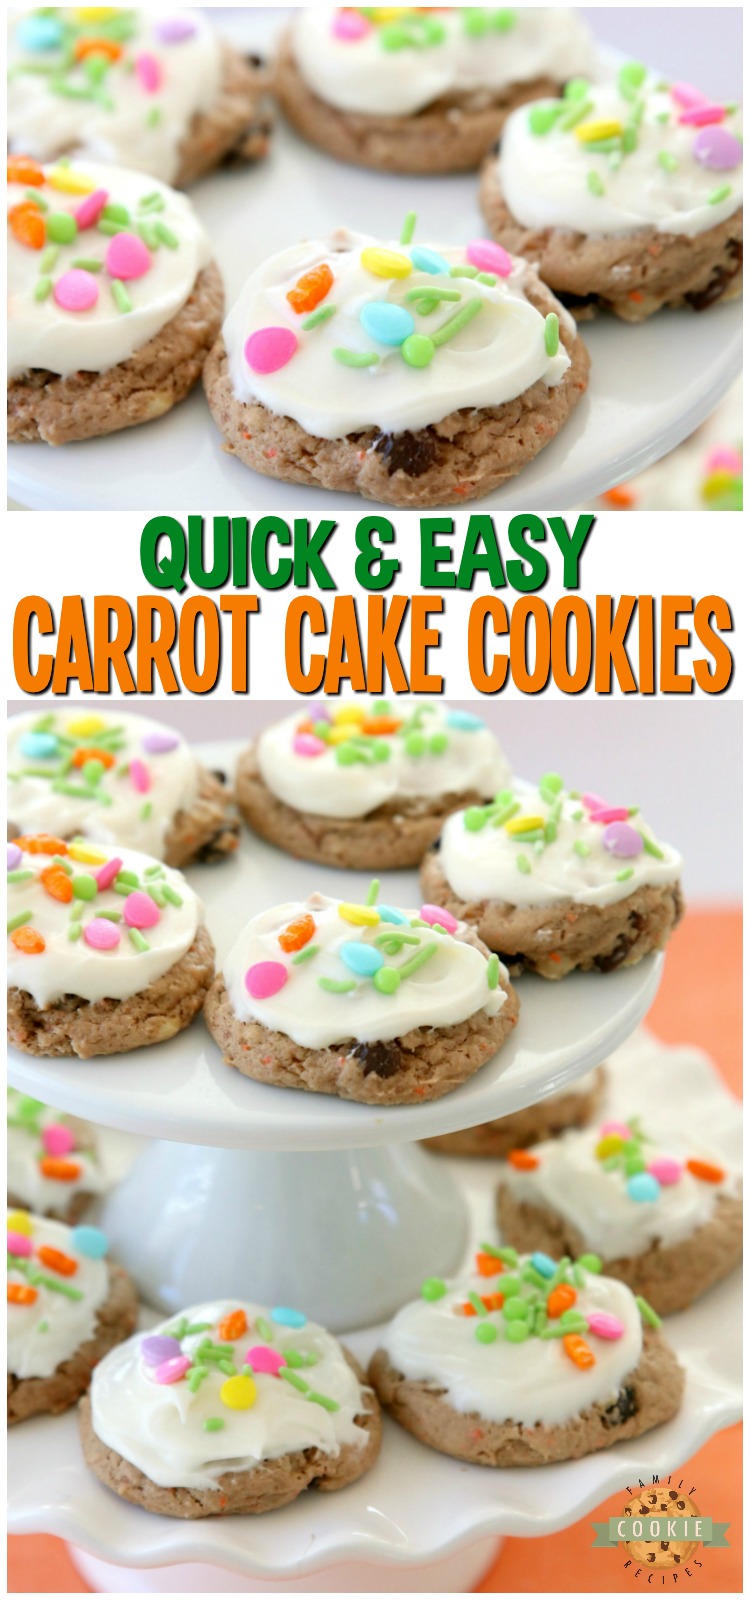 Carrot Cake Cookies are soft and chewy, flavorful carrot cake cookies made with a cake mix! Topped with a creamy cheesecake frosting, these carrot cake cookies are perfect for Easter!  #carrotcake #cookies #cakemix #cookie #Spring #Easter #recipe #dessert from FAMILY COOKIE RECIPES